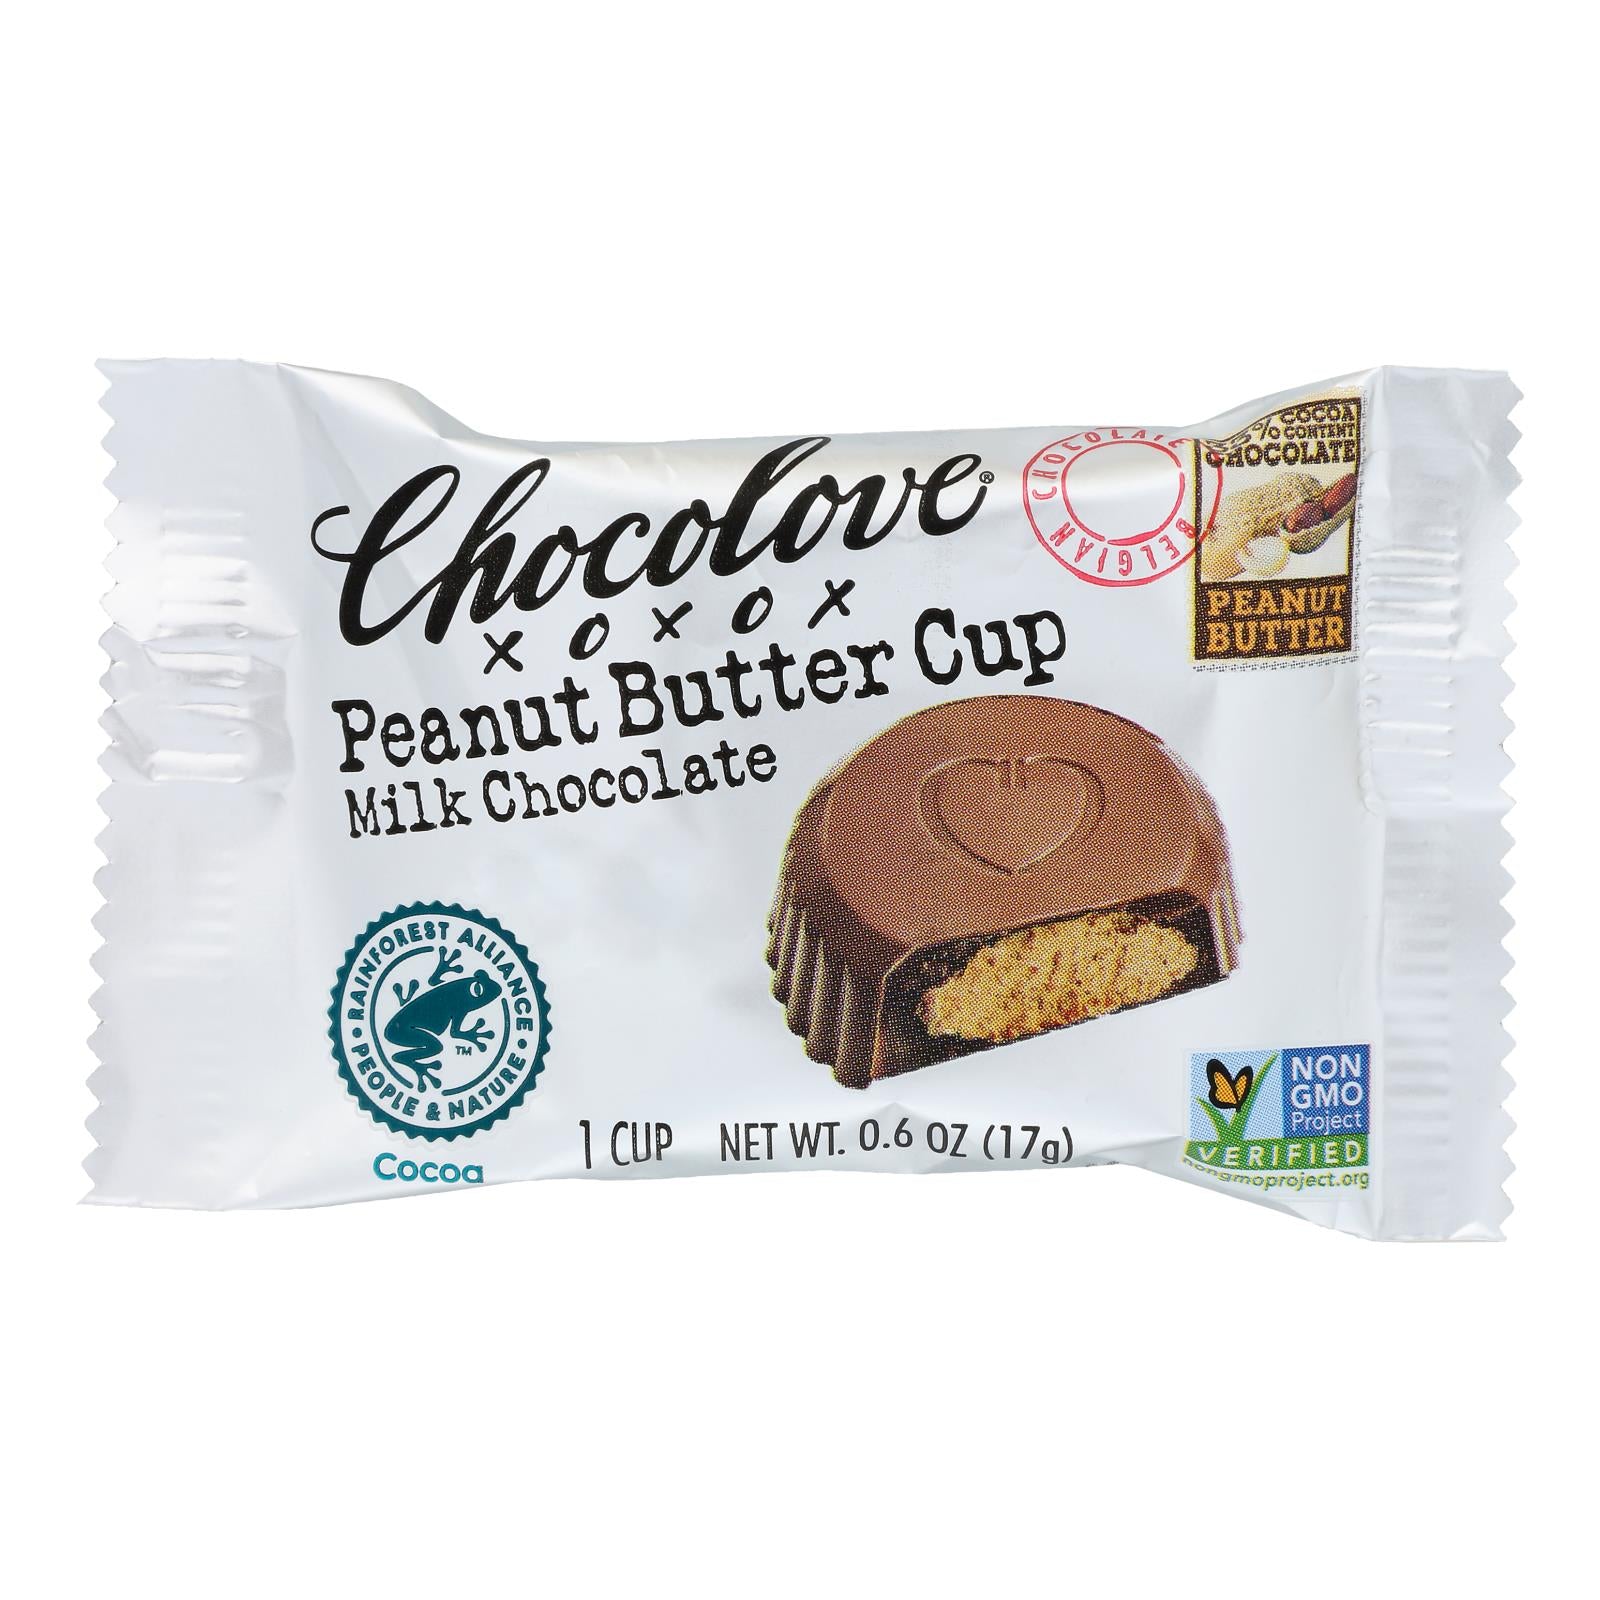 Chocolove Xoxox - Cup - Peanut Butter - Milk Chocolate - Case of 50 - .6 oz